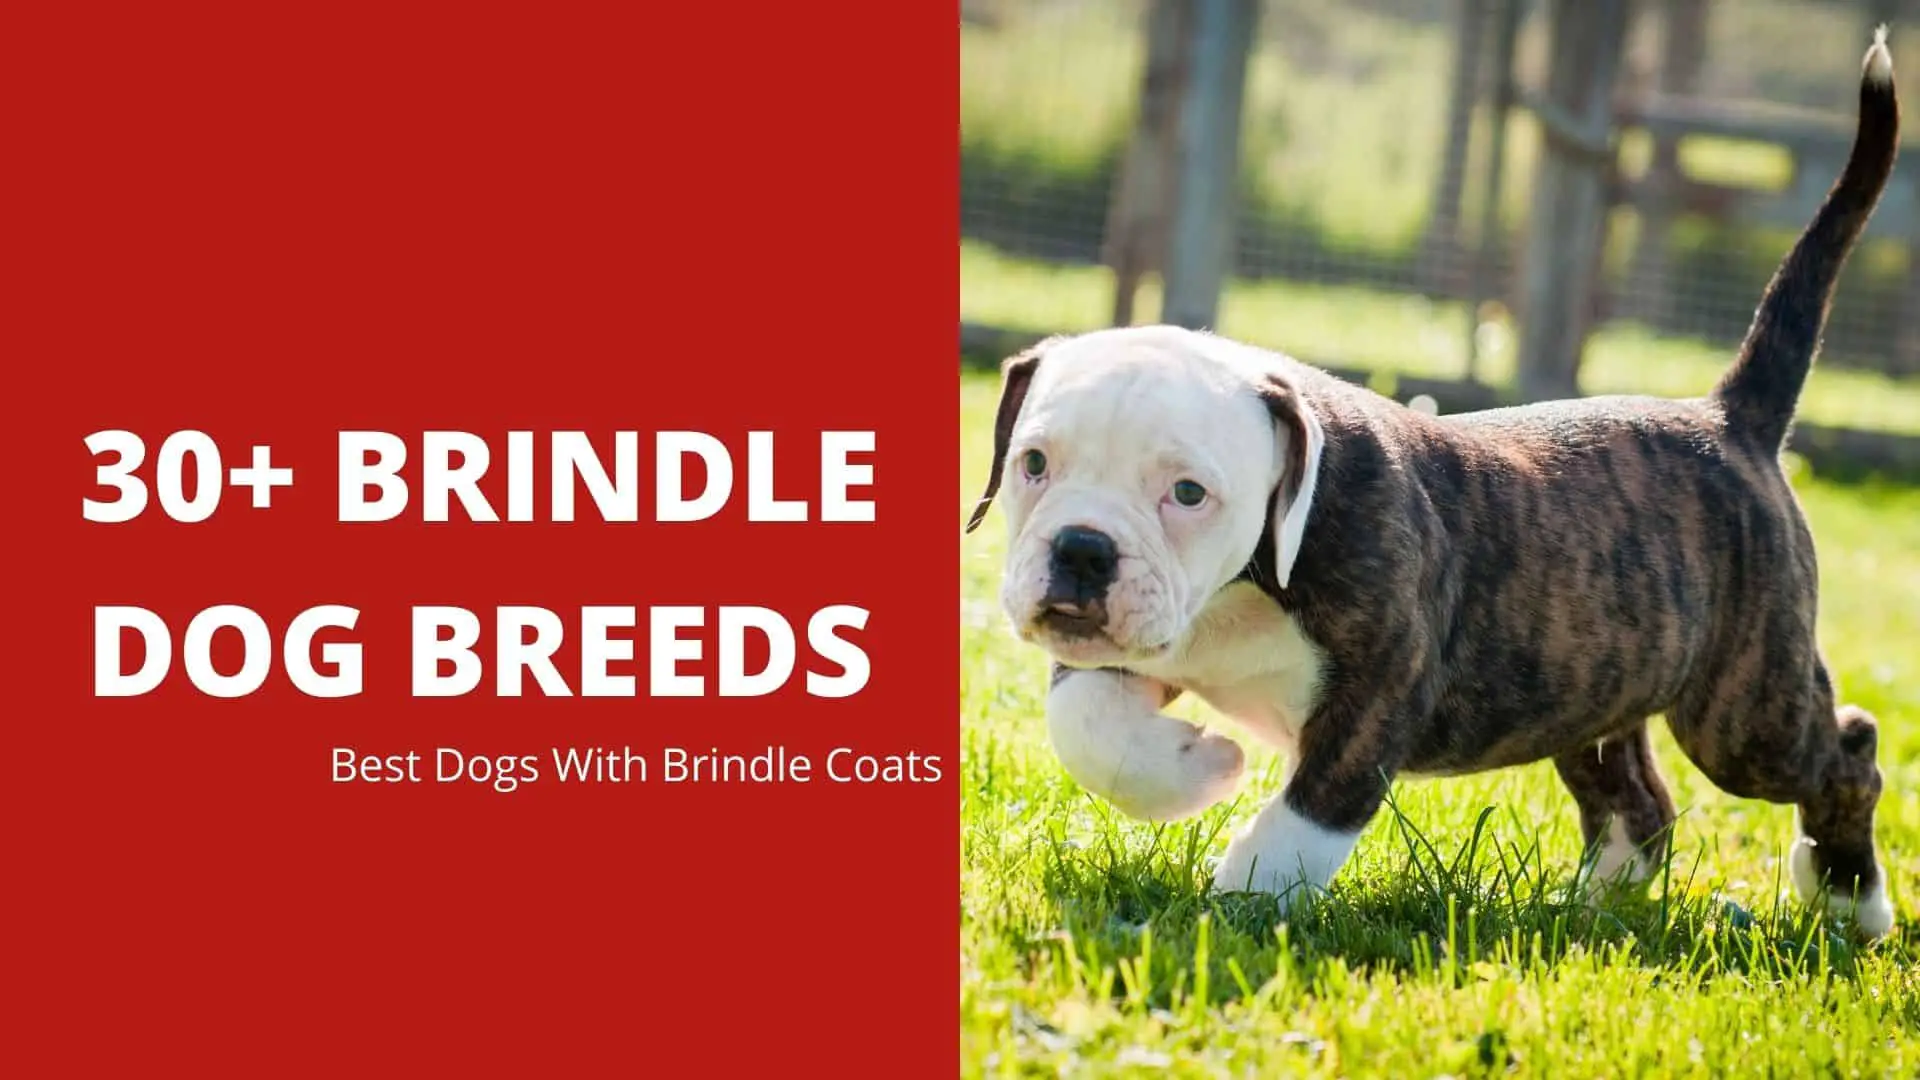 30+ Brindle Dog Breeds: Best Dogs With Brindle Coats